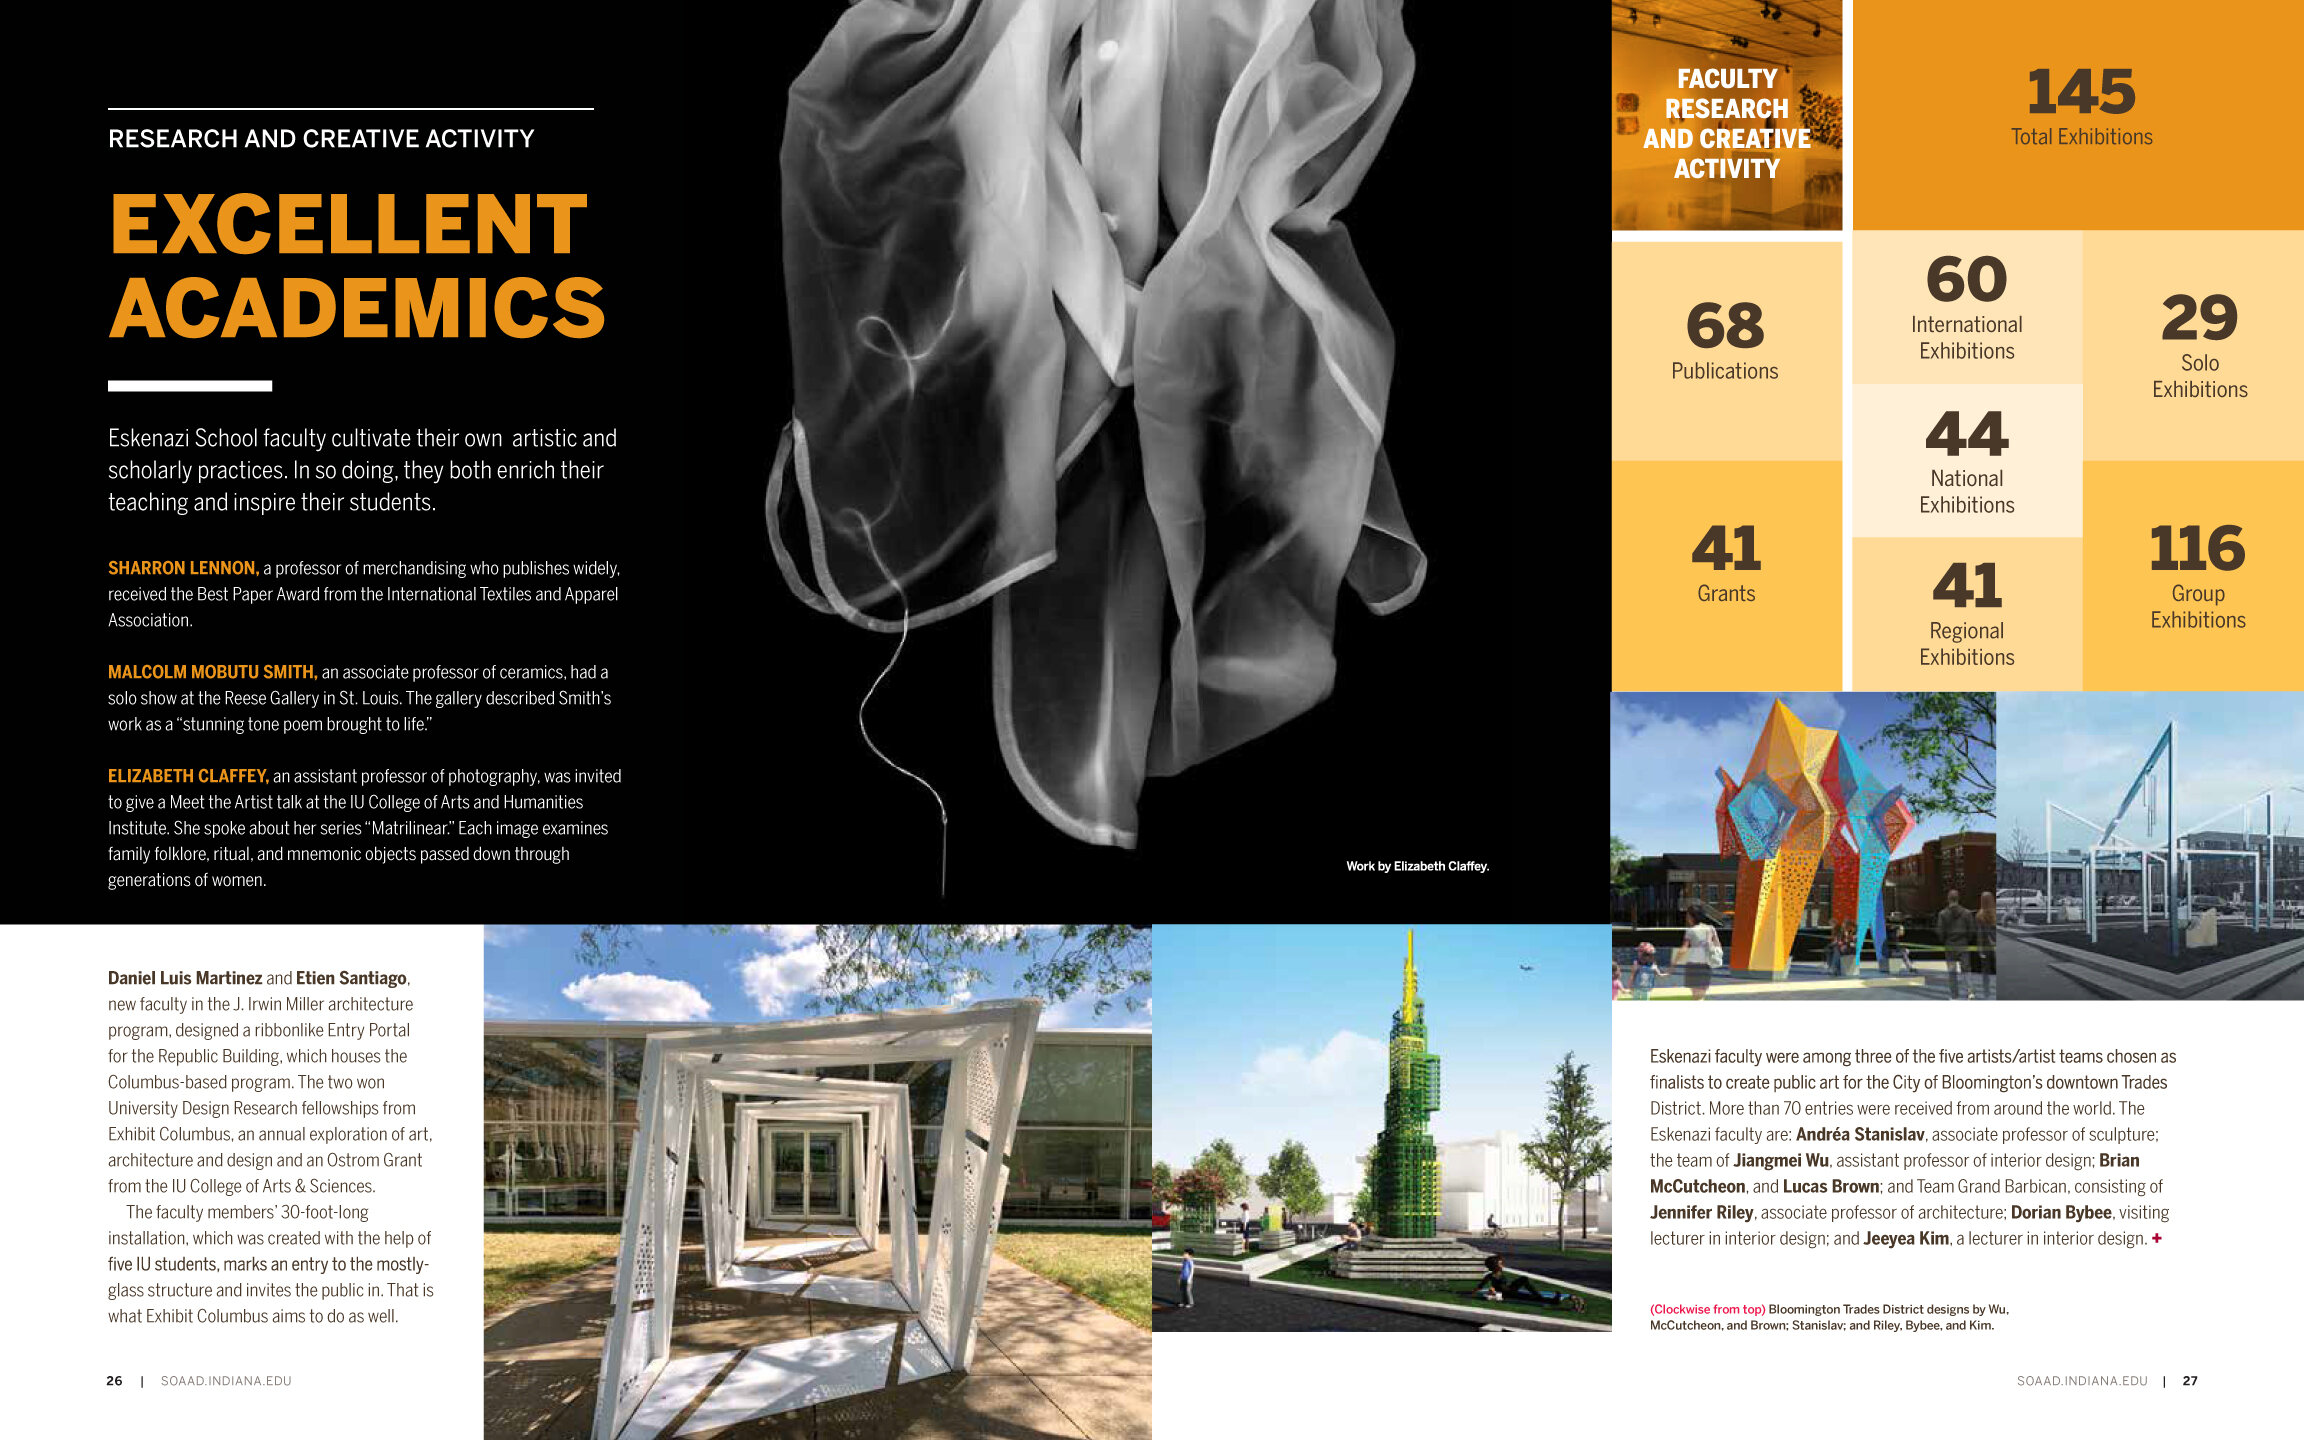  Image of interior spread of 2018-19 Eskenazi School annual report featuring information and images of faculty creative activity and research 